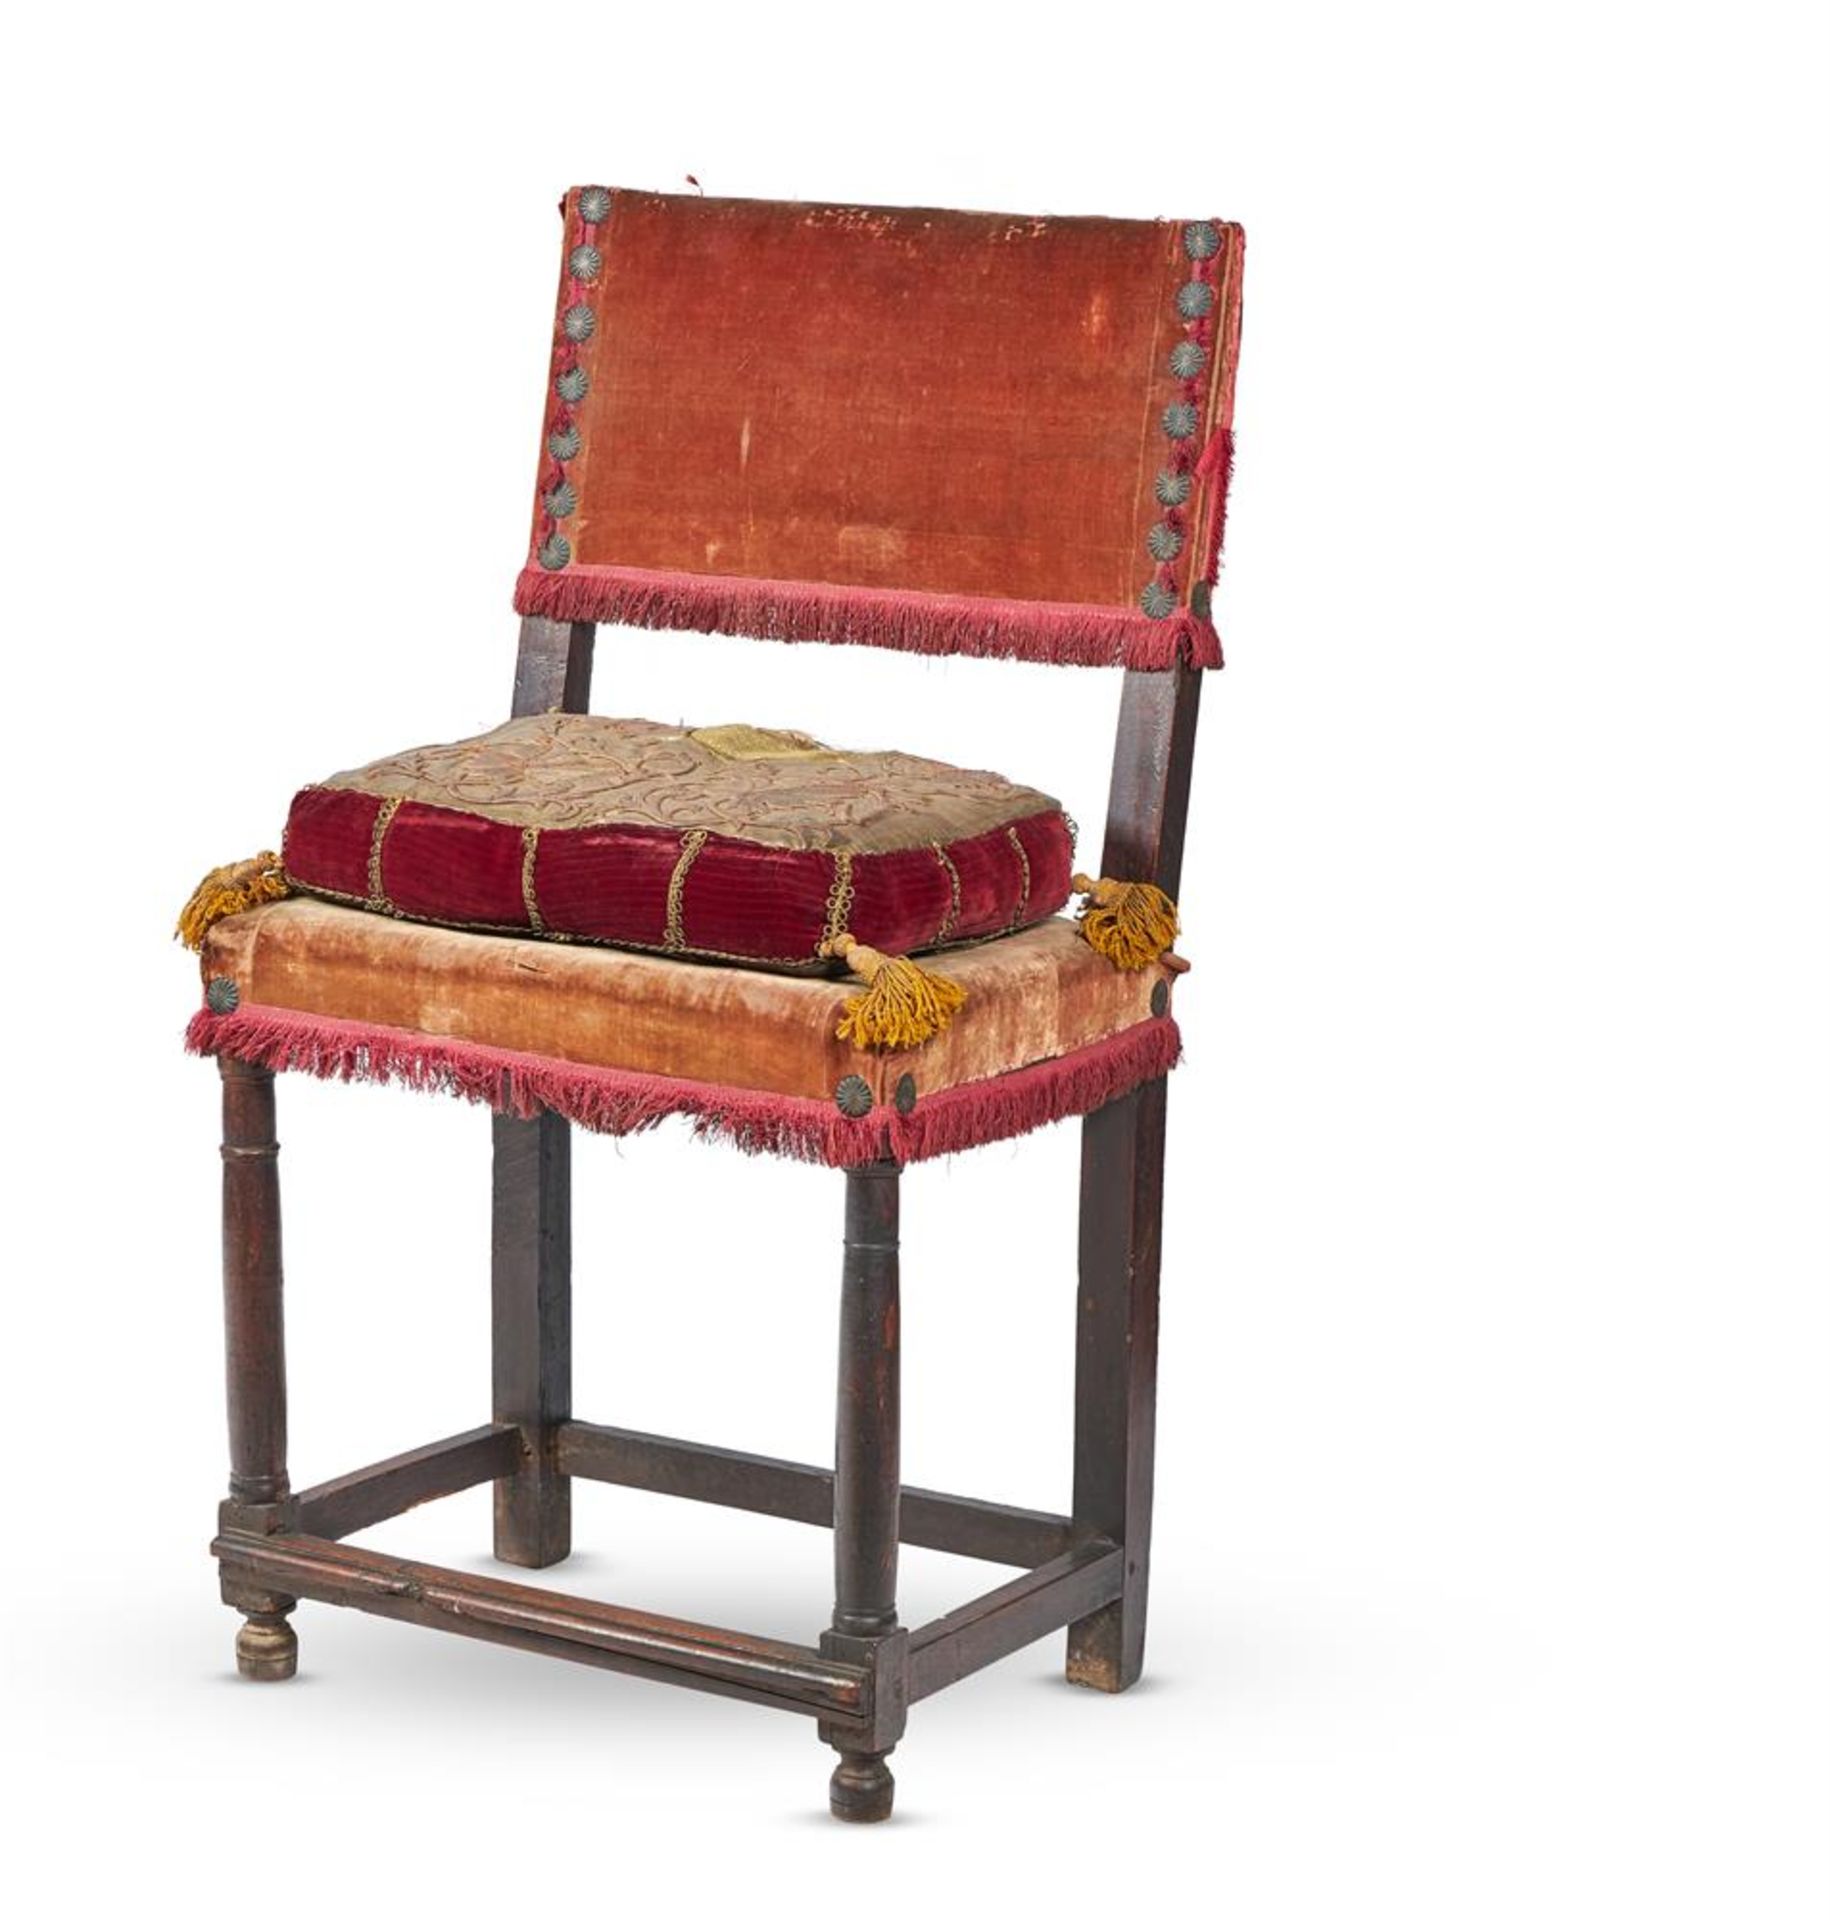 A PAIR OF ITALIAN WALNUT AND PARCEL GILT ARMCHAIRS, EARLY 18TH CENTURY - Image 3 of 3